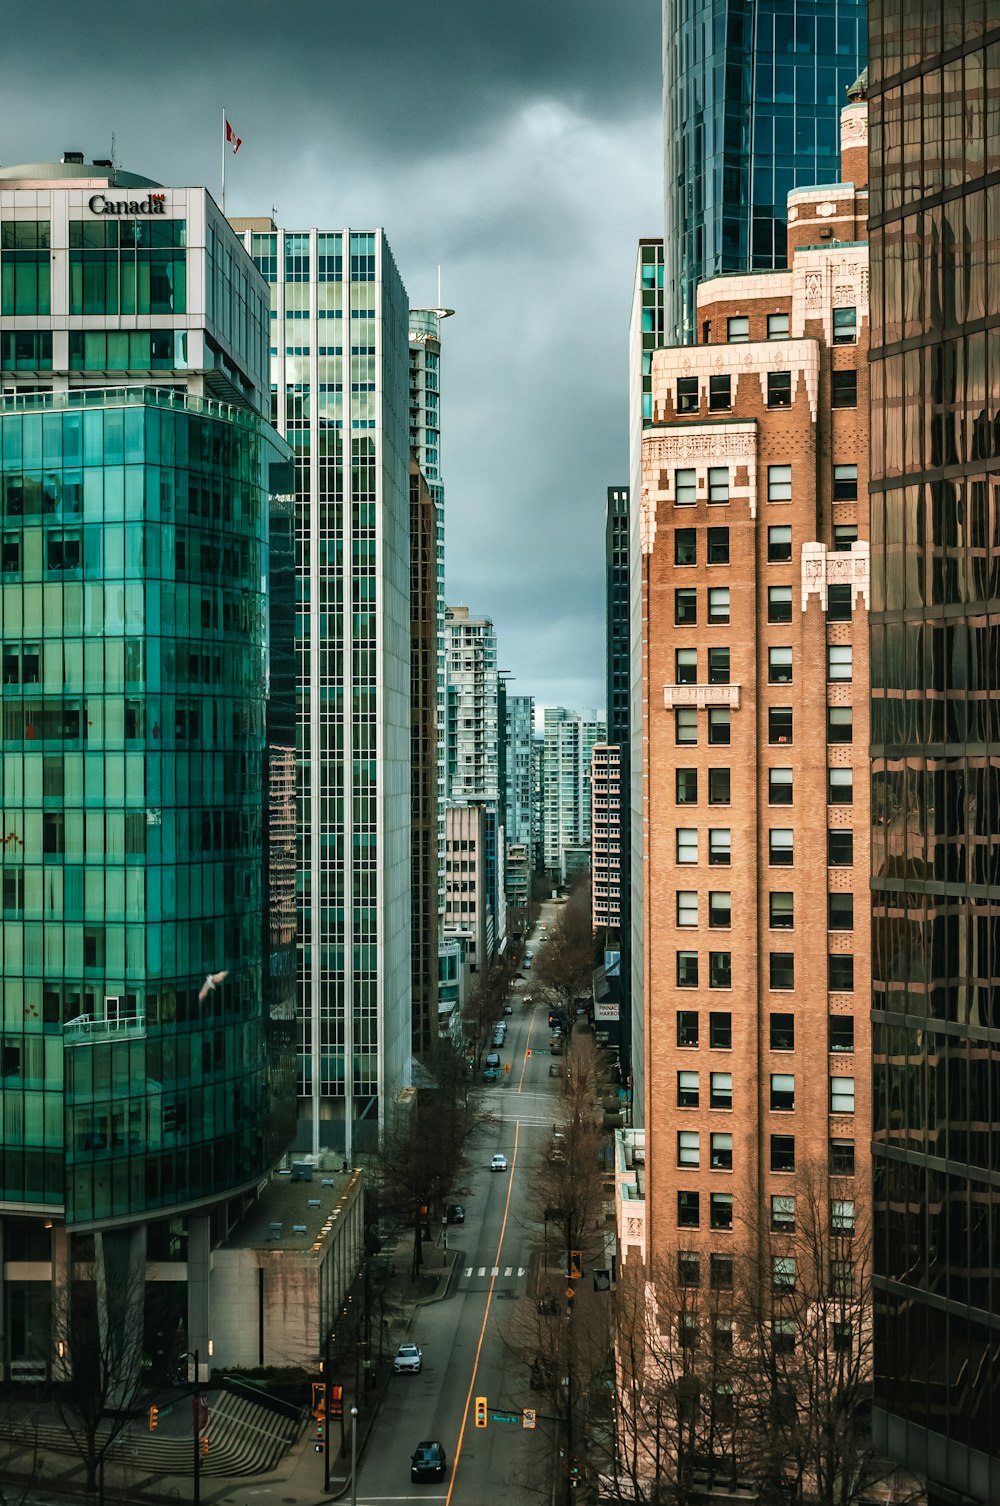 a city street with tall buildings and a cloudy sky